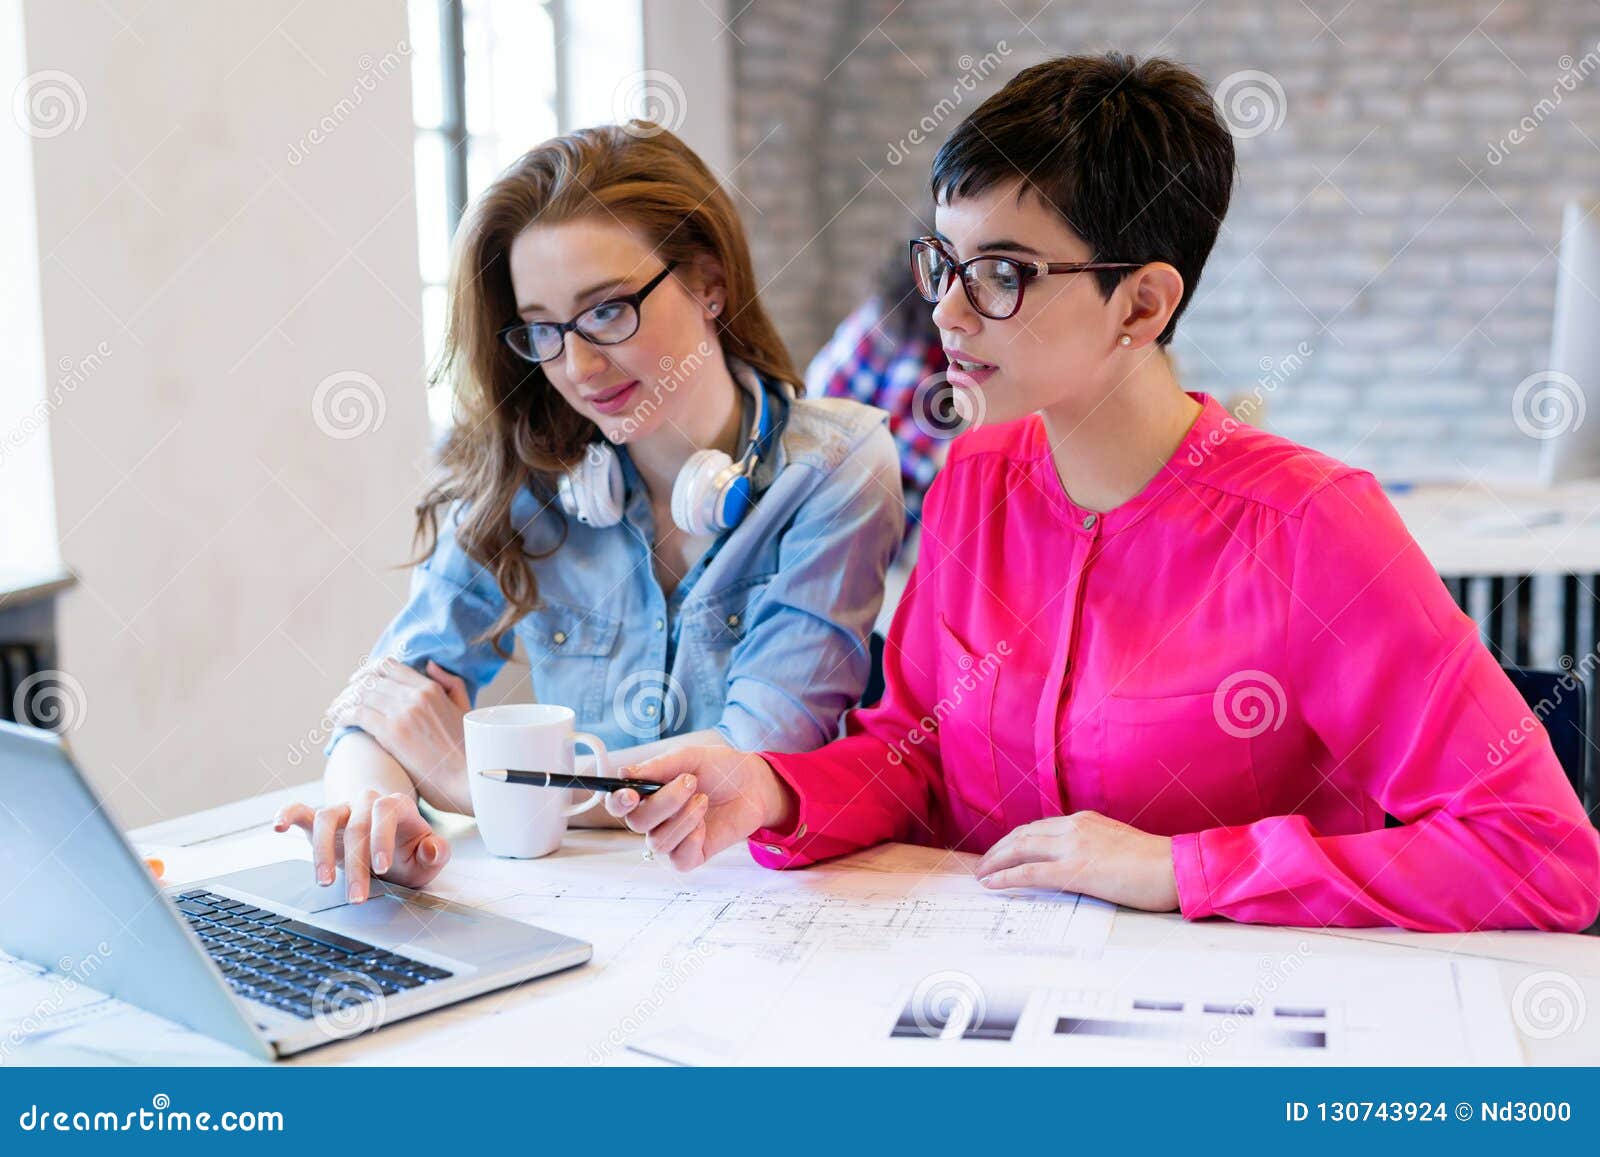 Picture of Architects Working Together in Office Stock Photo - Image of ...